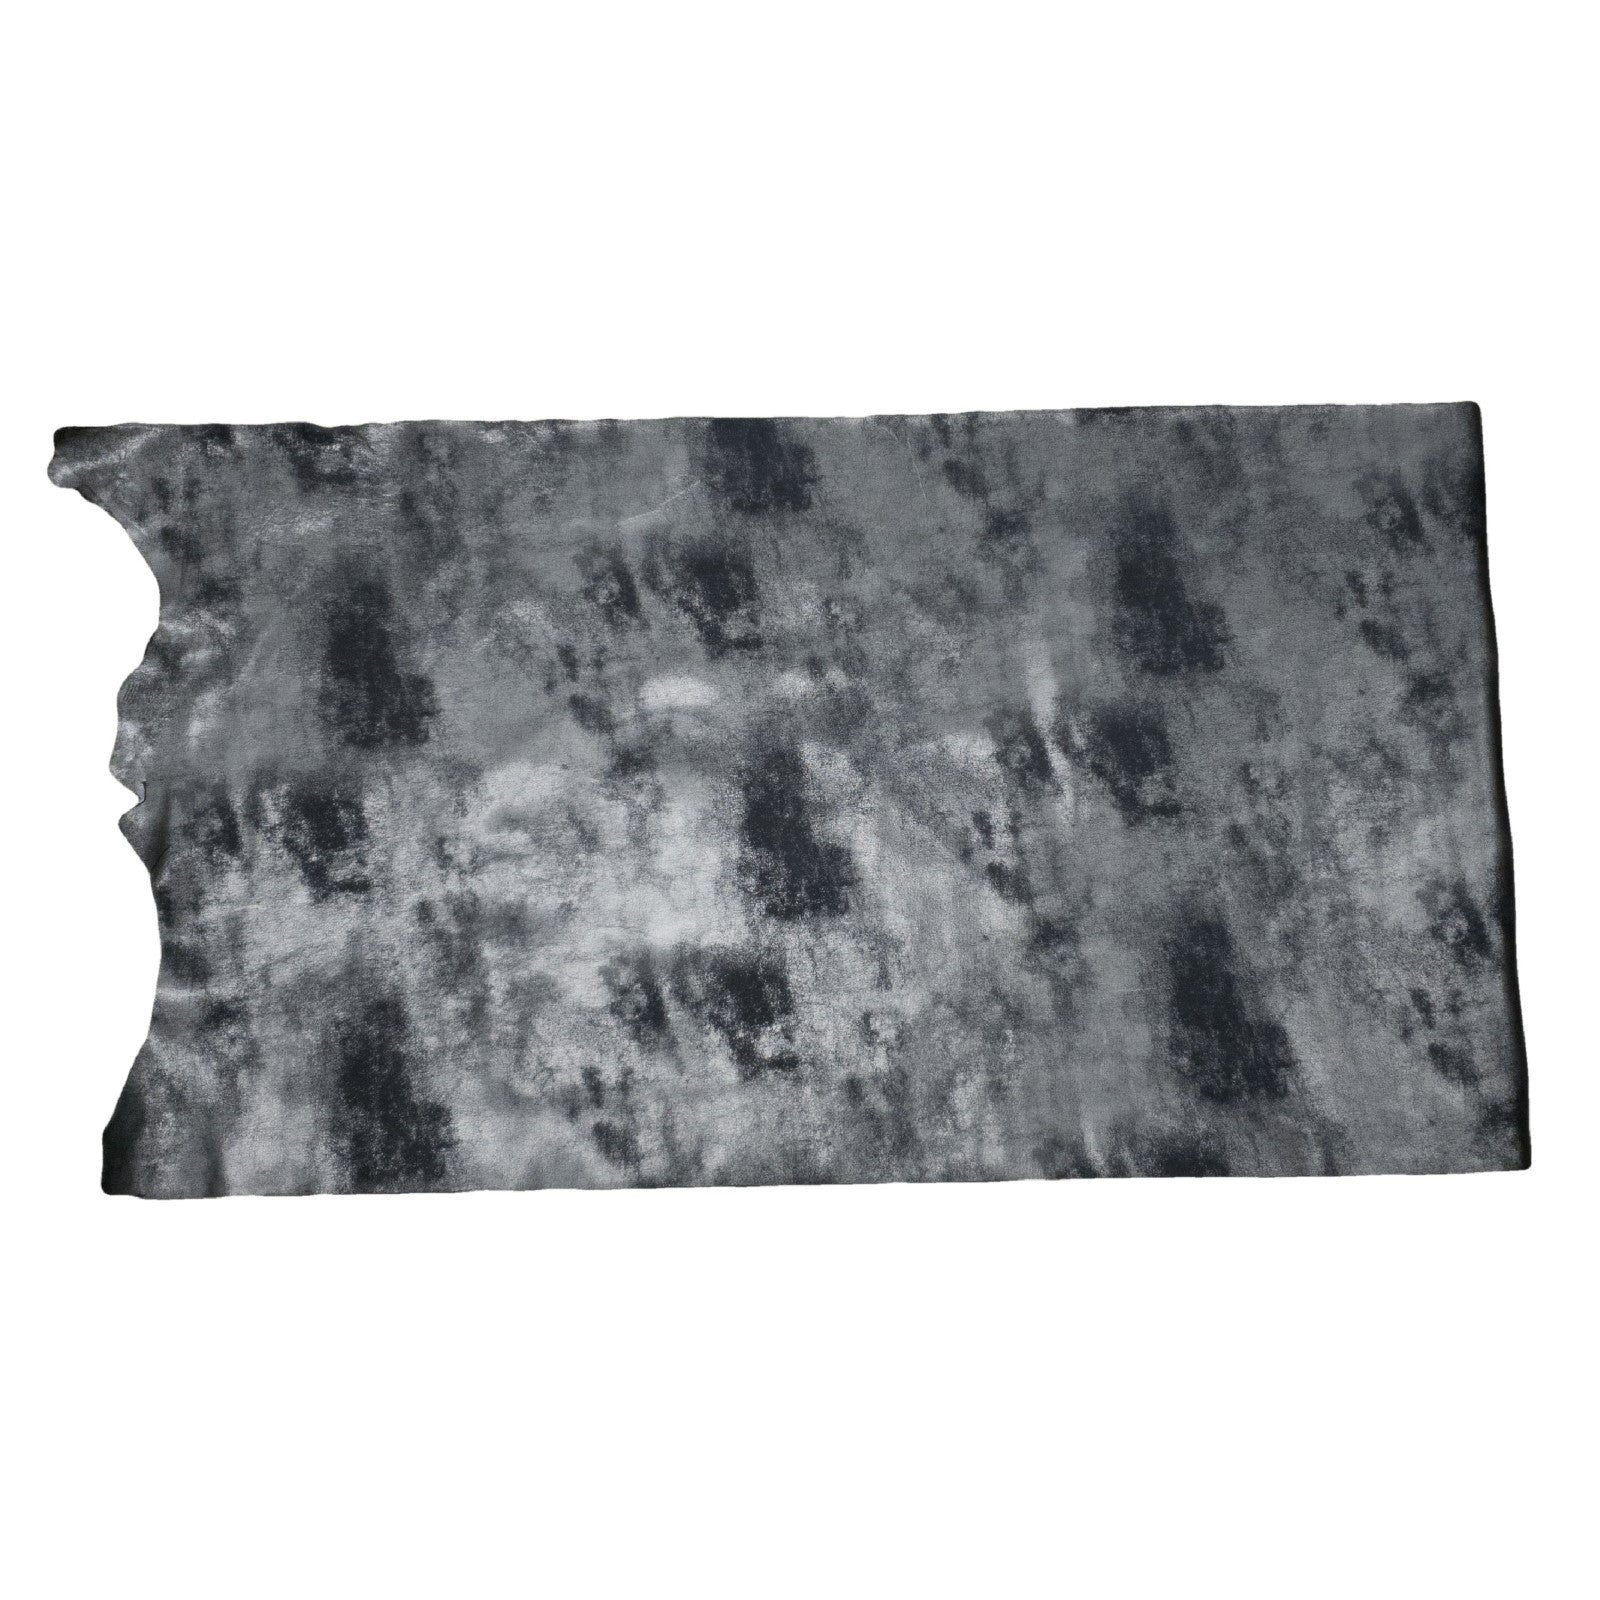 Back In Black Rock N Roll 2-3 oz Leather Cow Hides, Middle Piece / 6.5-7.5 Square Foot | The Leather Guy